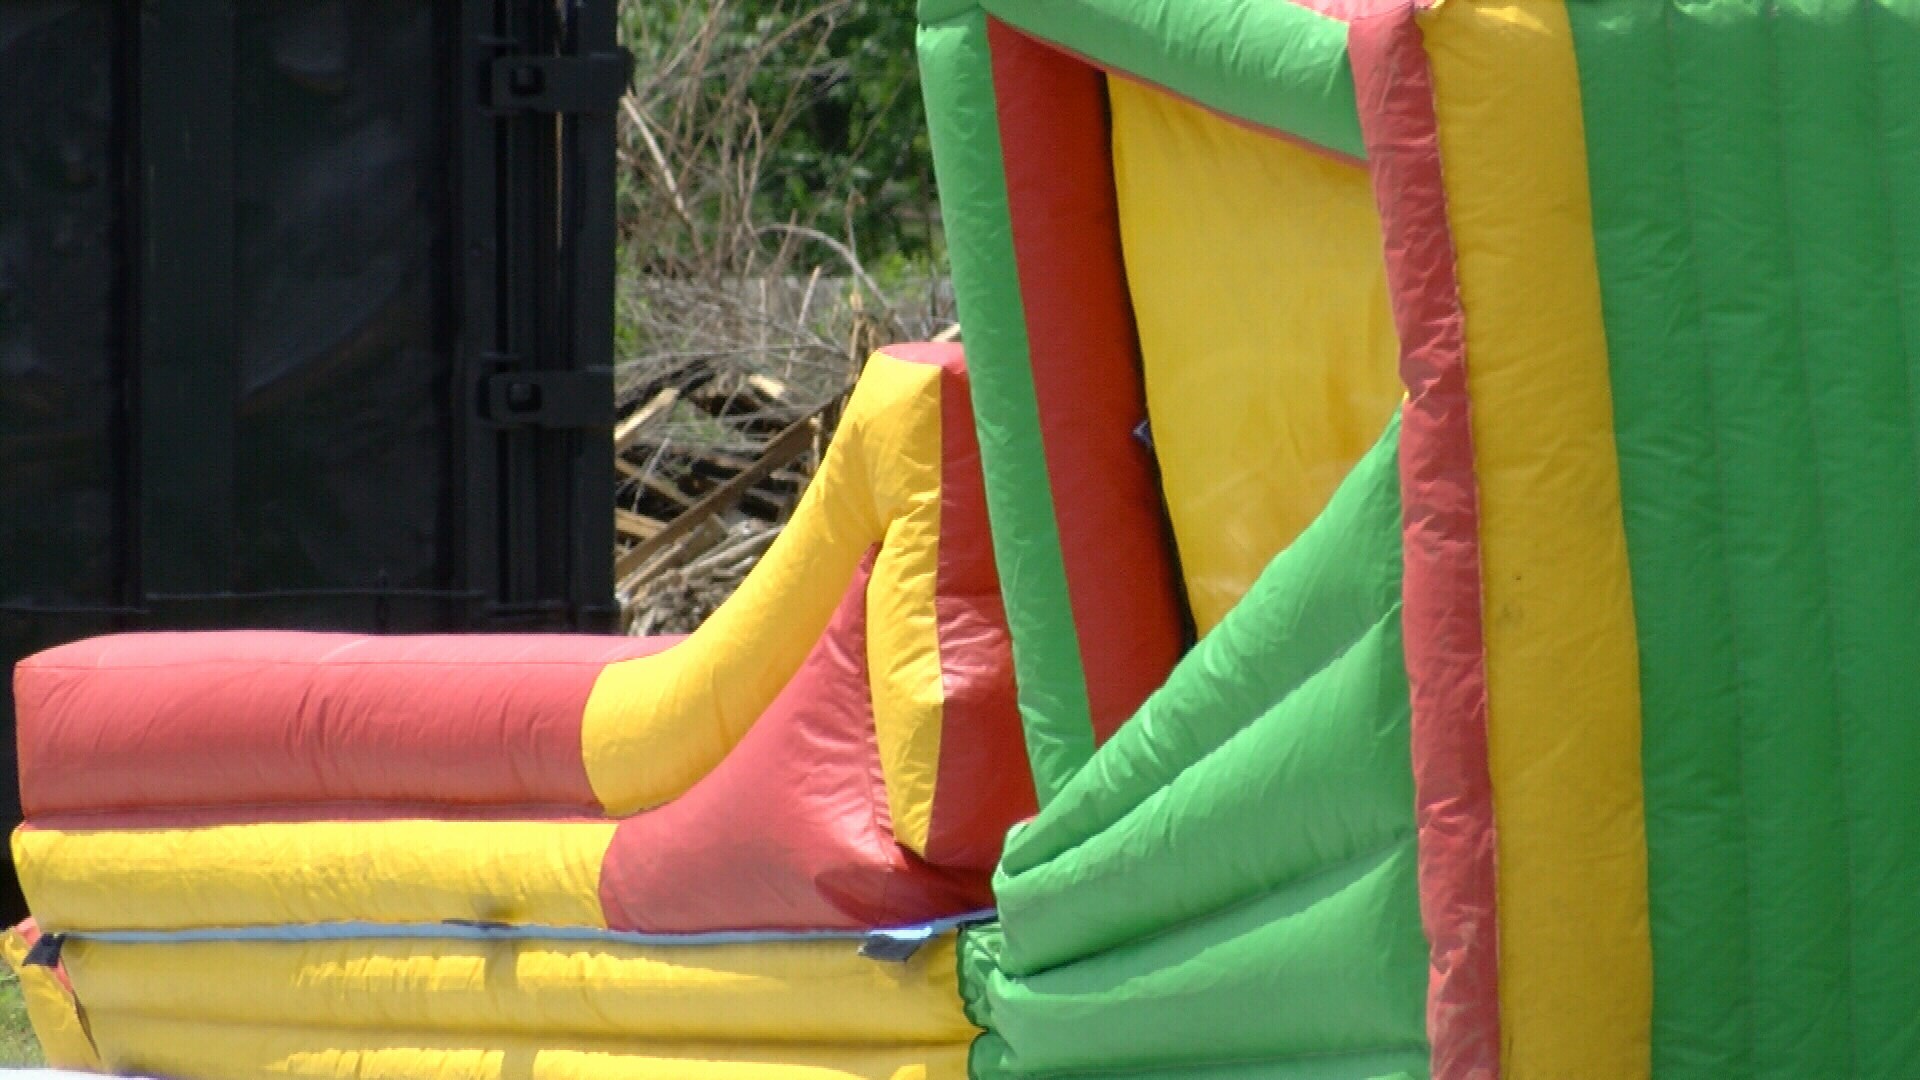 Oklahoma students injured by wind-blown inflatable play area